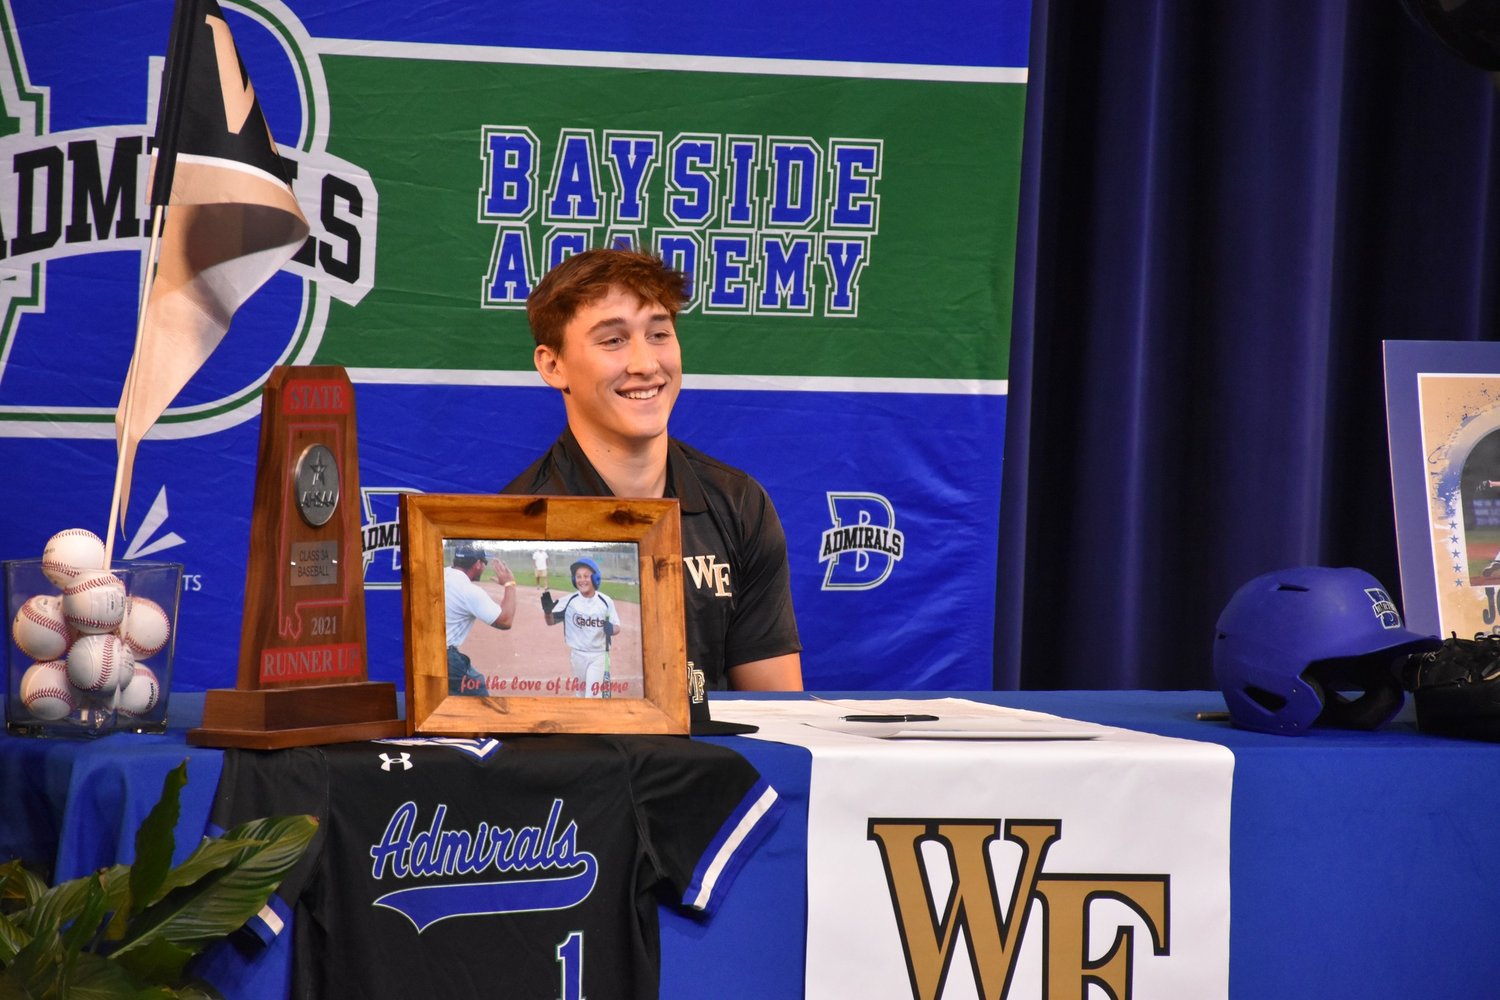 Josh Gunther was one of three baseball signees honored at Bayside Academy’s Nov. 9 ceremony as part of National Signing Day. Gunther will head to North Carolina to join the Wake Forest Demon Deacons.